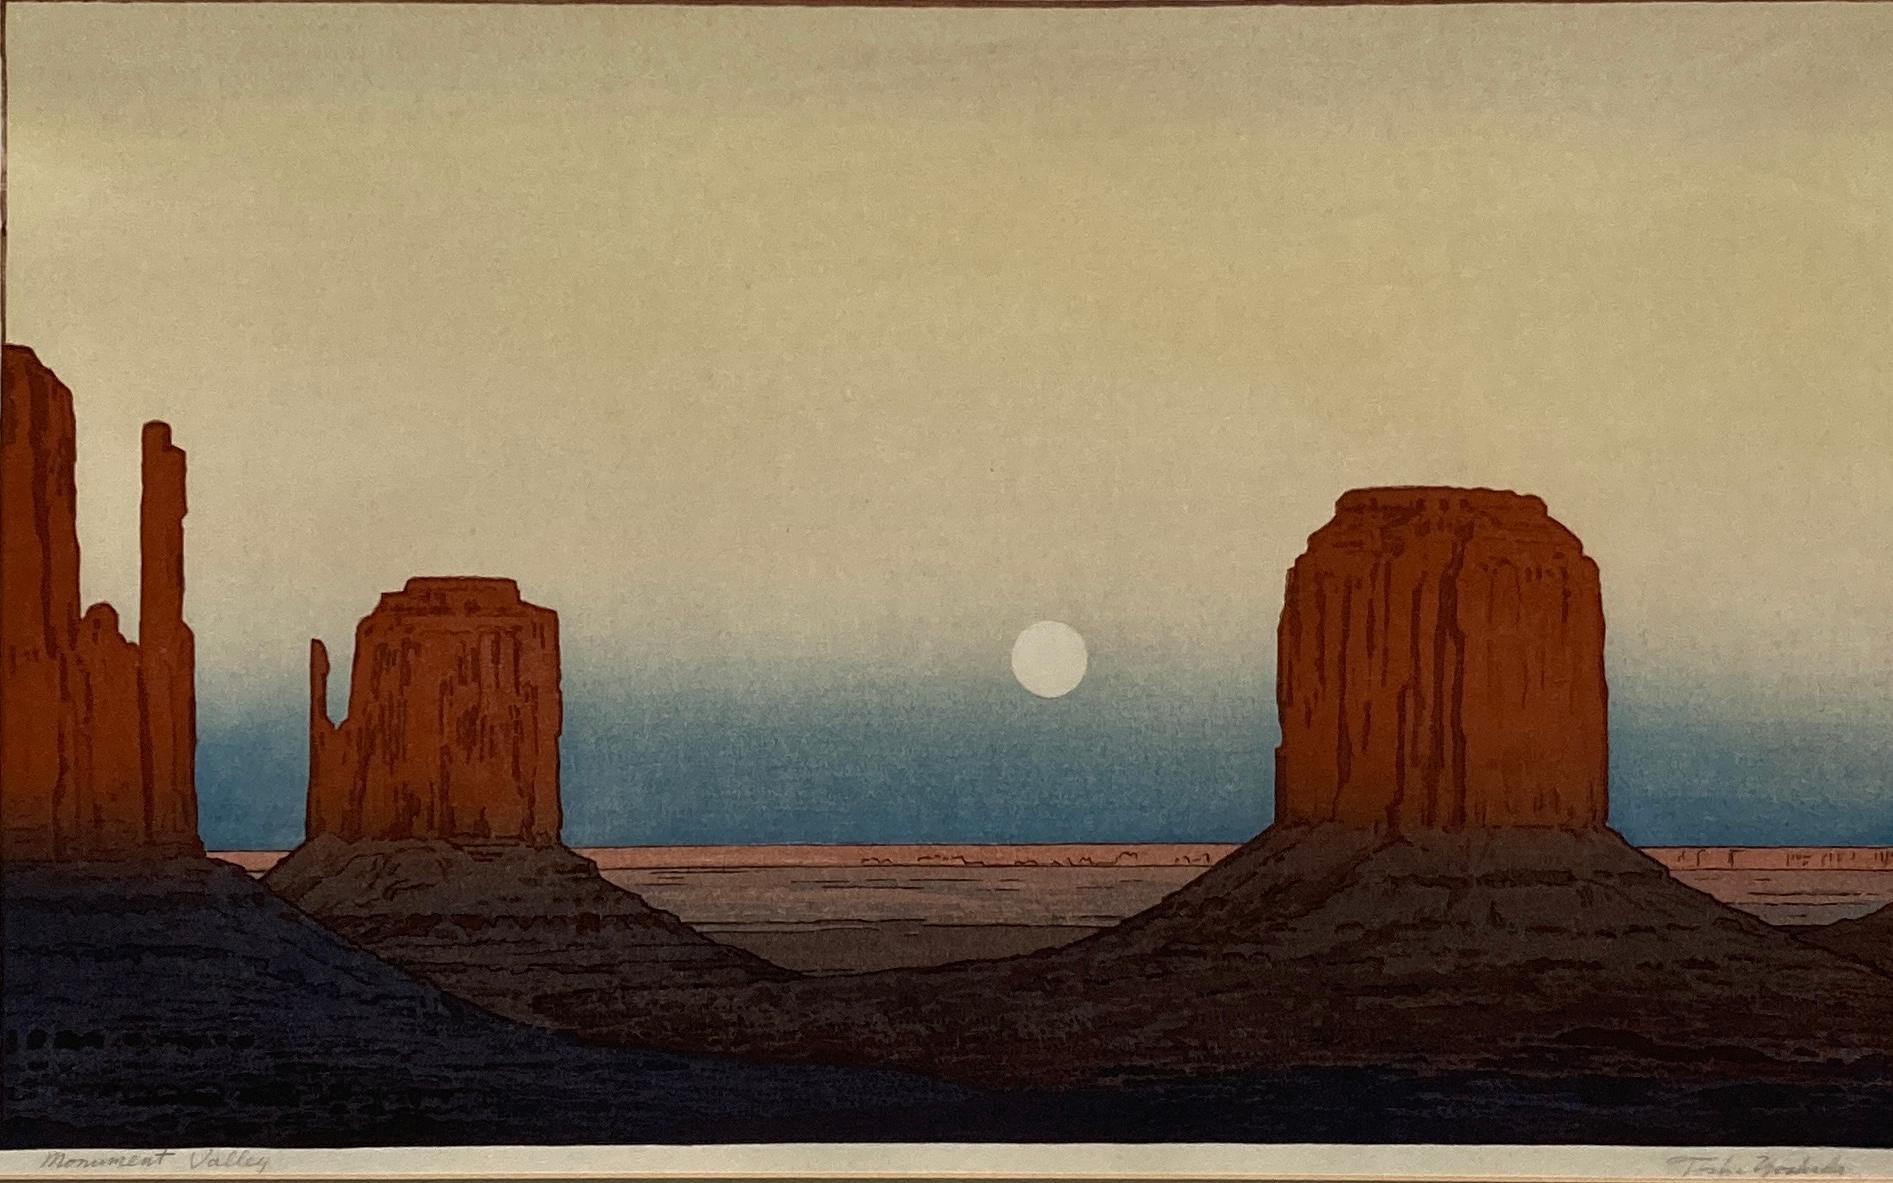 Yoshi Toshida (Japanese, 1911-1995),
Monument Valley, 1971
Woodblock in colors
Pencil signed lower right, titled lower left.
Dated and titled in Japanese left margin.
Image: 11.75 x 19.5 inches
Framed: 21.75 x 29.25 inches
Toshi Yoshida was born in